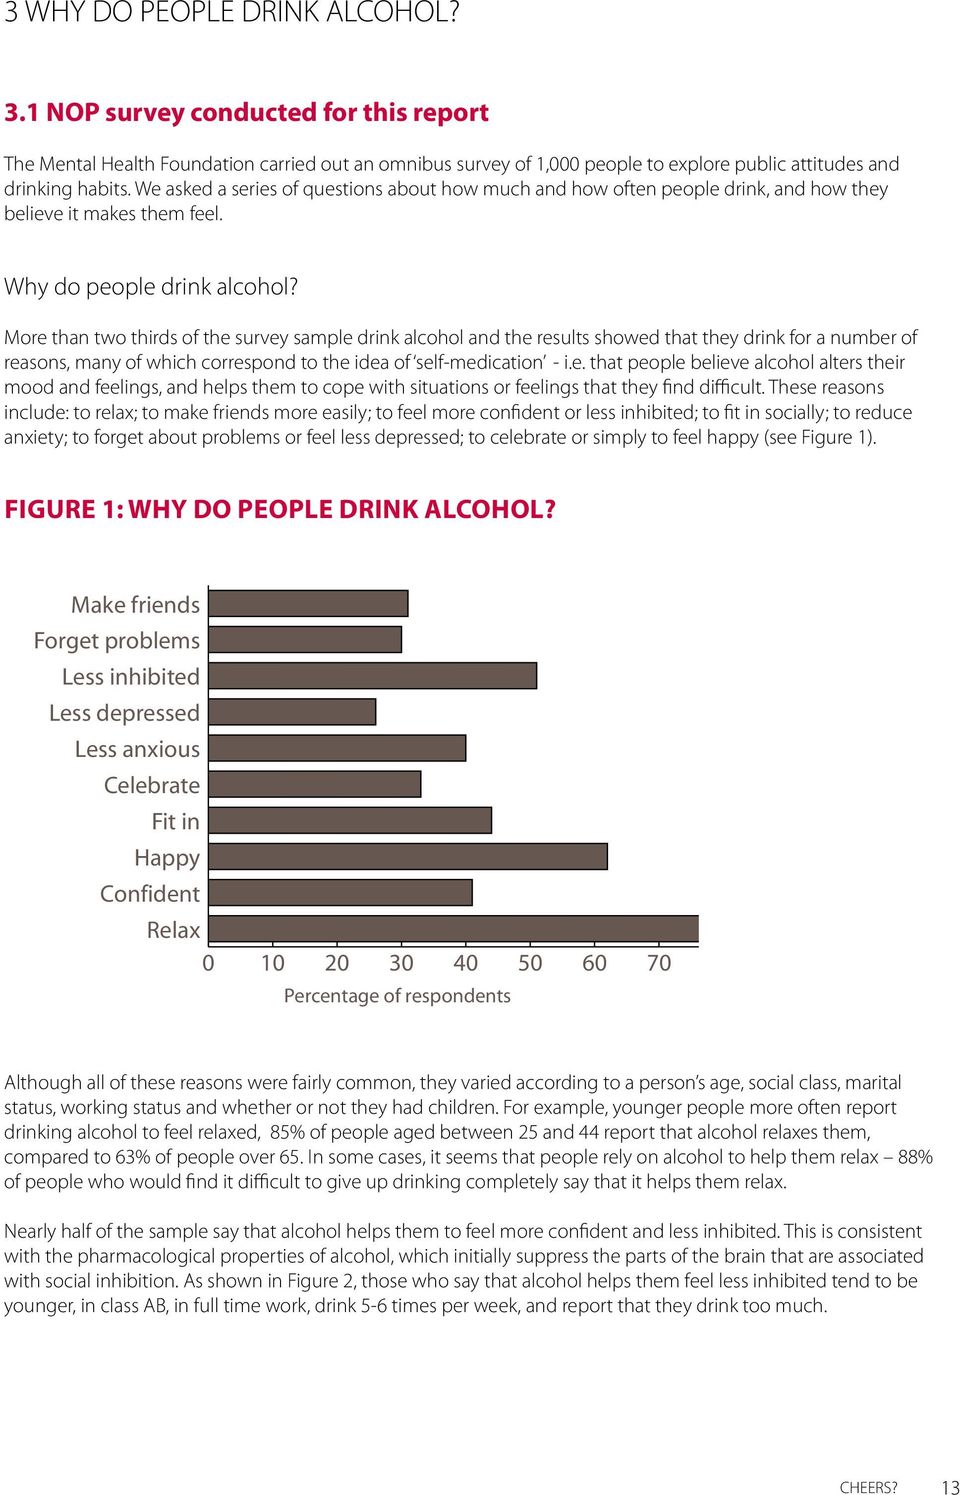 More than two thirds of the survey sample drink alcohol and the results showed that they drink for a number of reasons, many of which correspond to the idea of self-medication - i.e. that people believe alcohol alters their mood and feelings, and helps them to cope with situations or feelings that they find difficult.